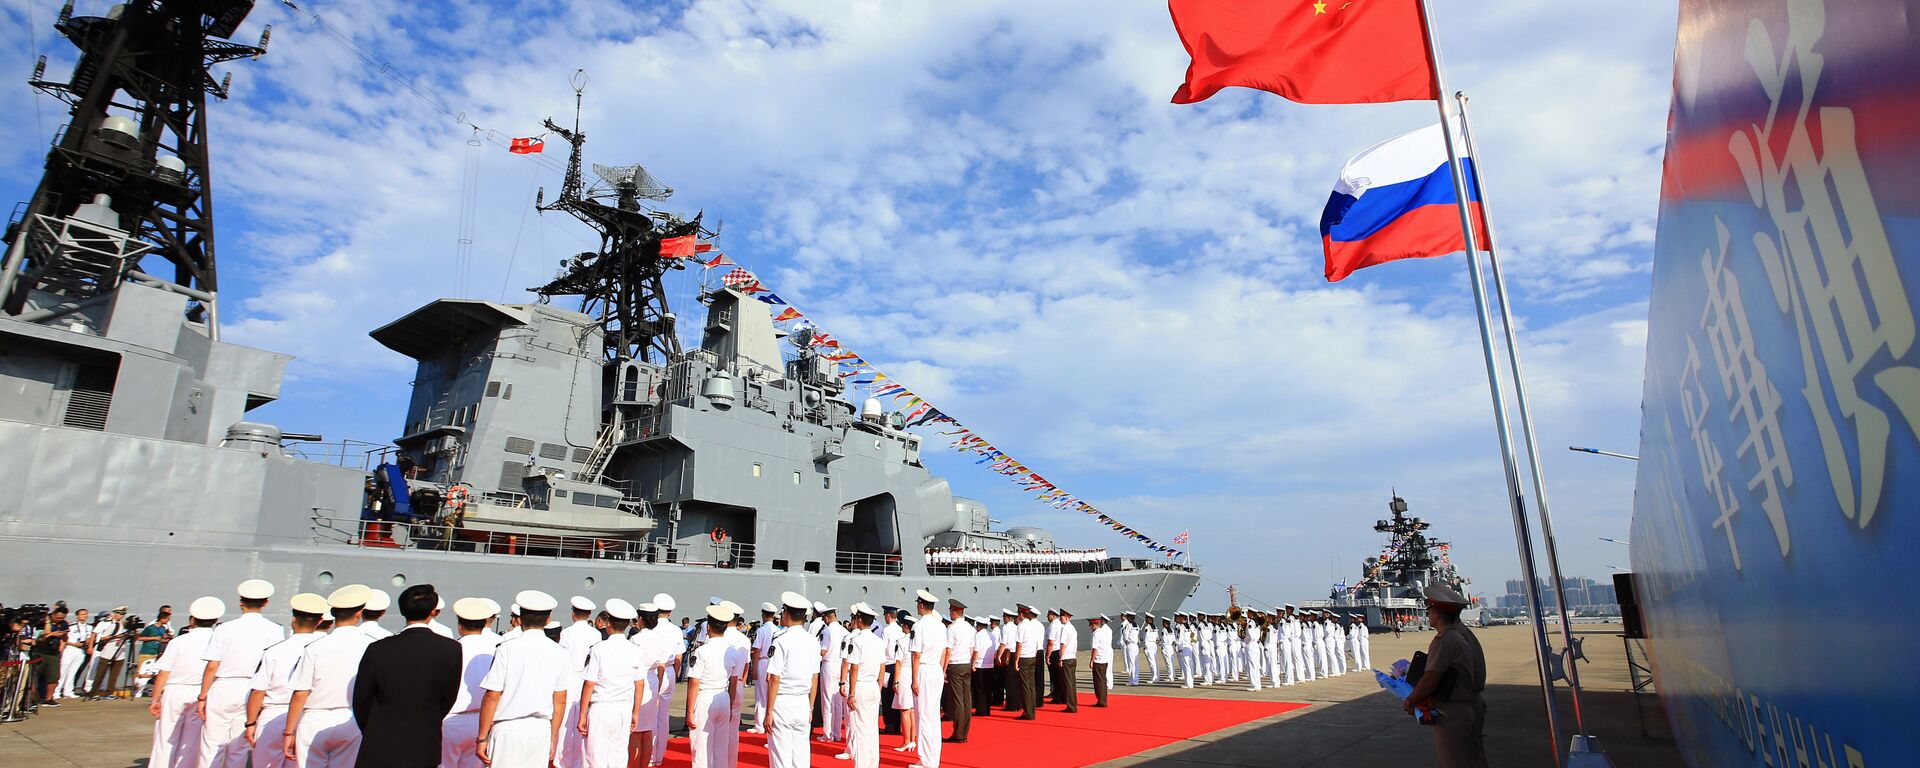 In this photo released by China's Xinhua News Agency, officers and soldiers of China's People's Liberation Army (PLA) Navy hold a welcome ceremony as a Russian naval ship arrives in port in Zhanjiang in southern China's Guangdong Province, Monday, Sept. 12, 2016 - Sputnik International, 1920, 23.12.2021